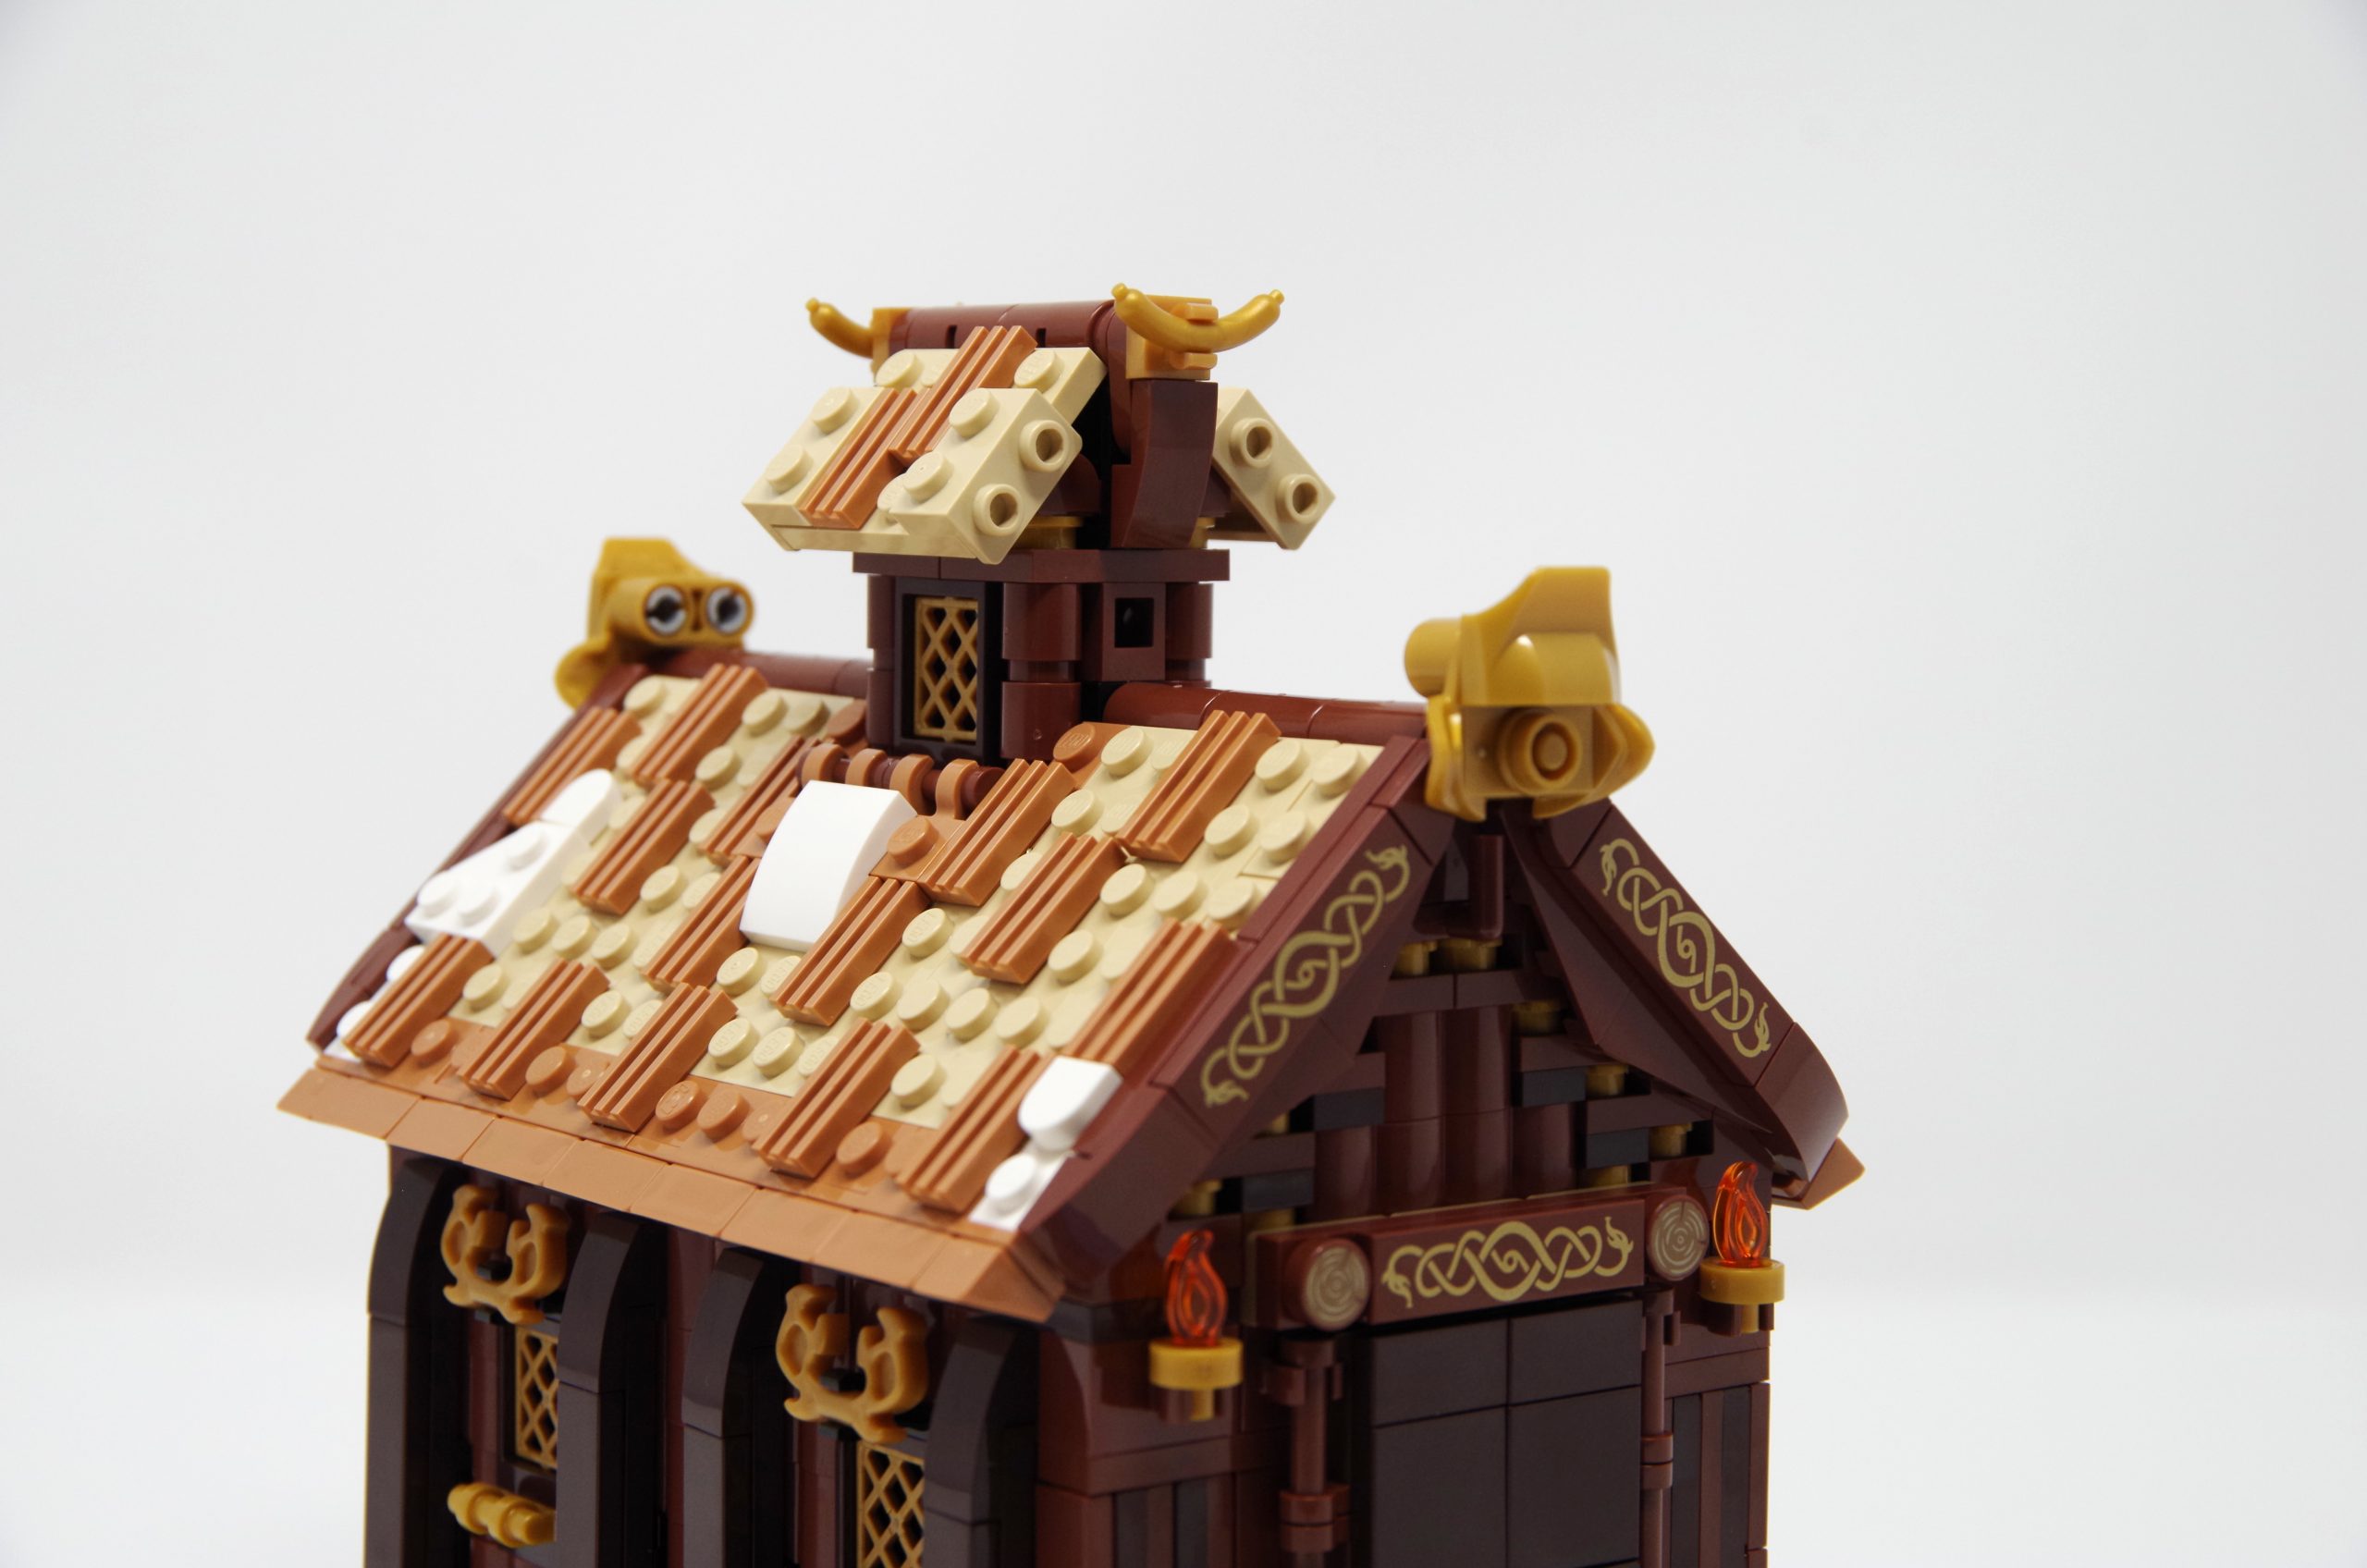 LEGO Ideas 21343 Viking Village pairs better than you'd expect